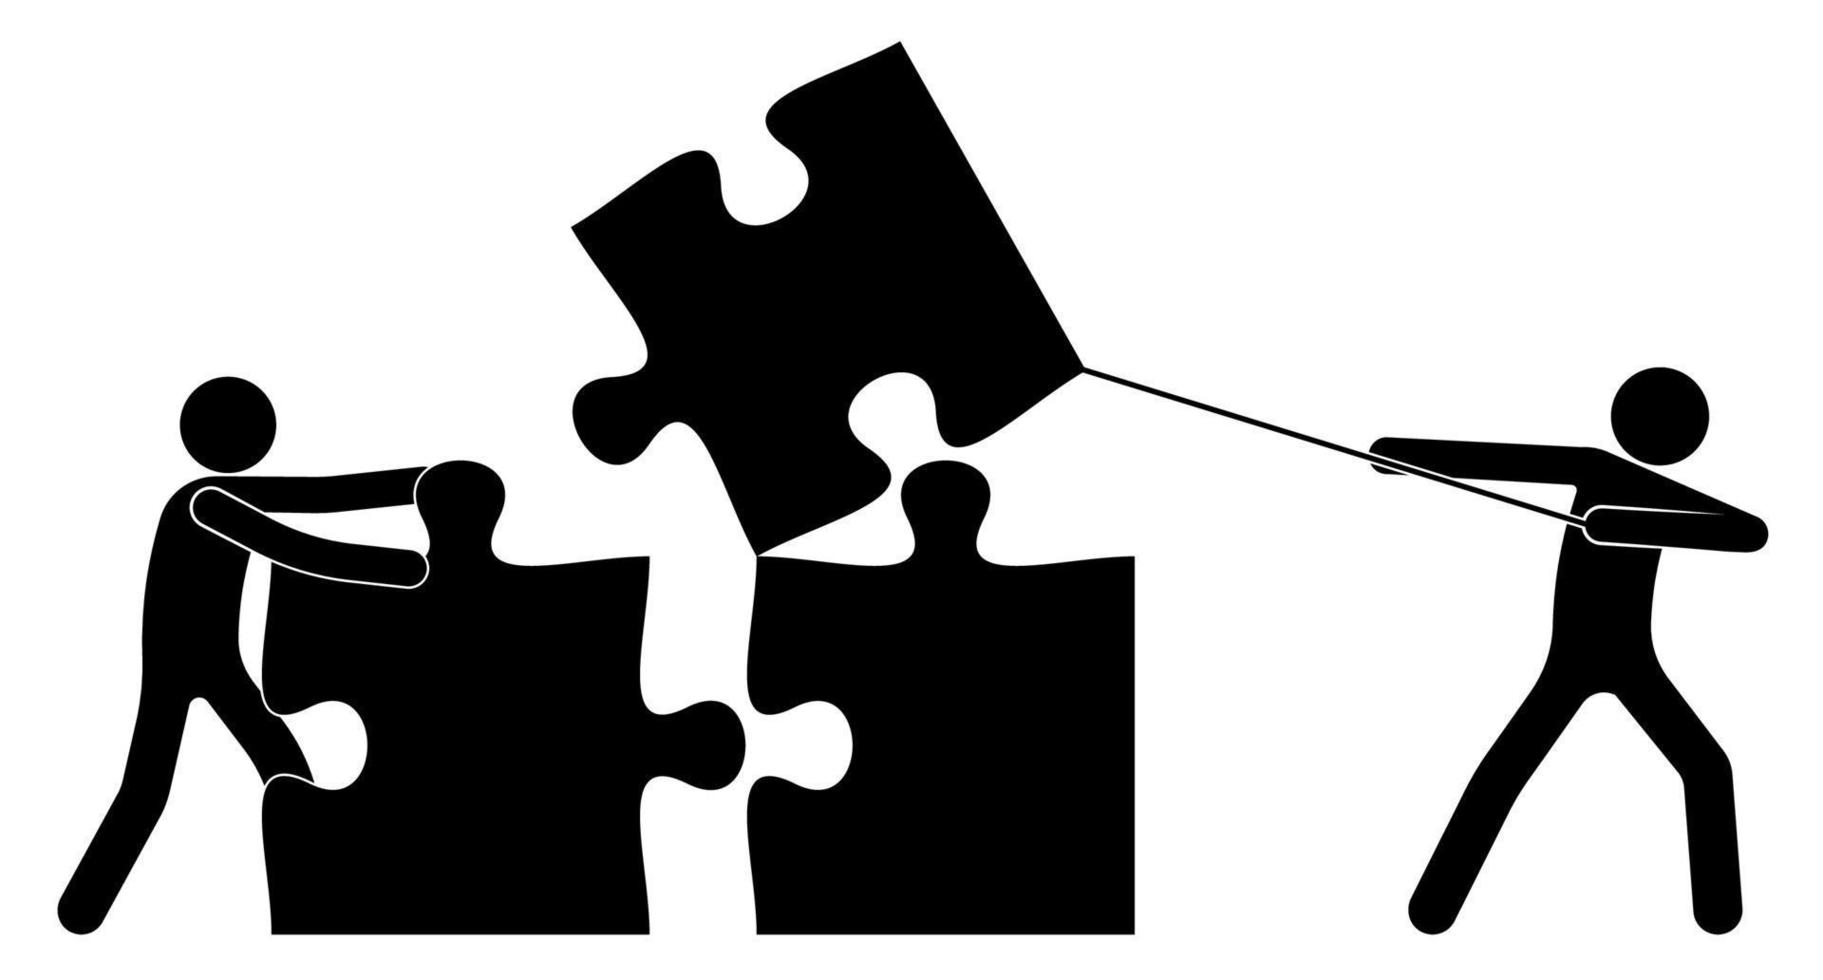 Teamwork. Two people, stick figure build together with puzzle pieces. Solving common problem by joint efforts. Work of people in team for common result. Vector